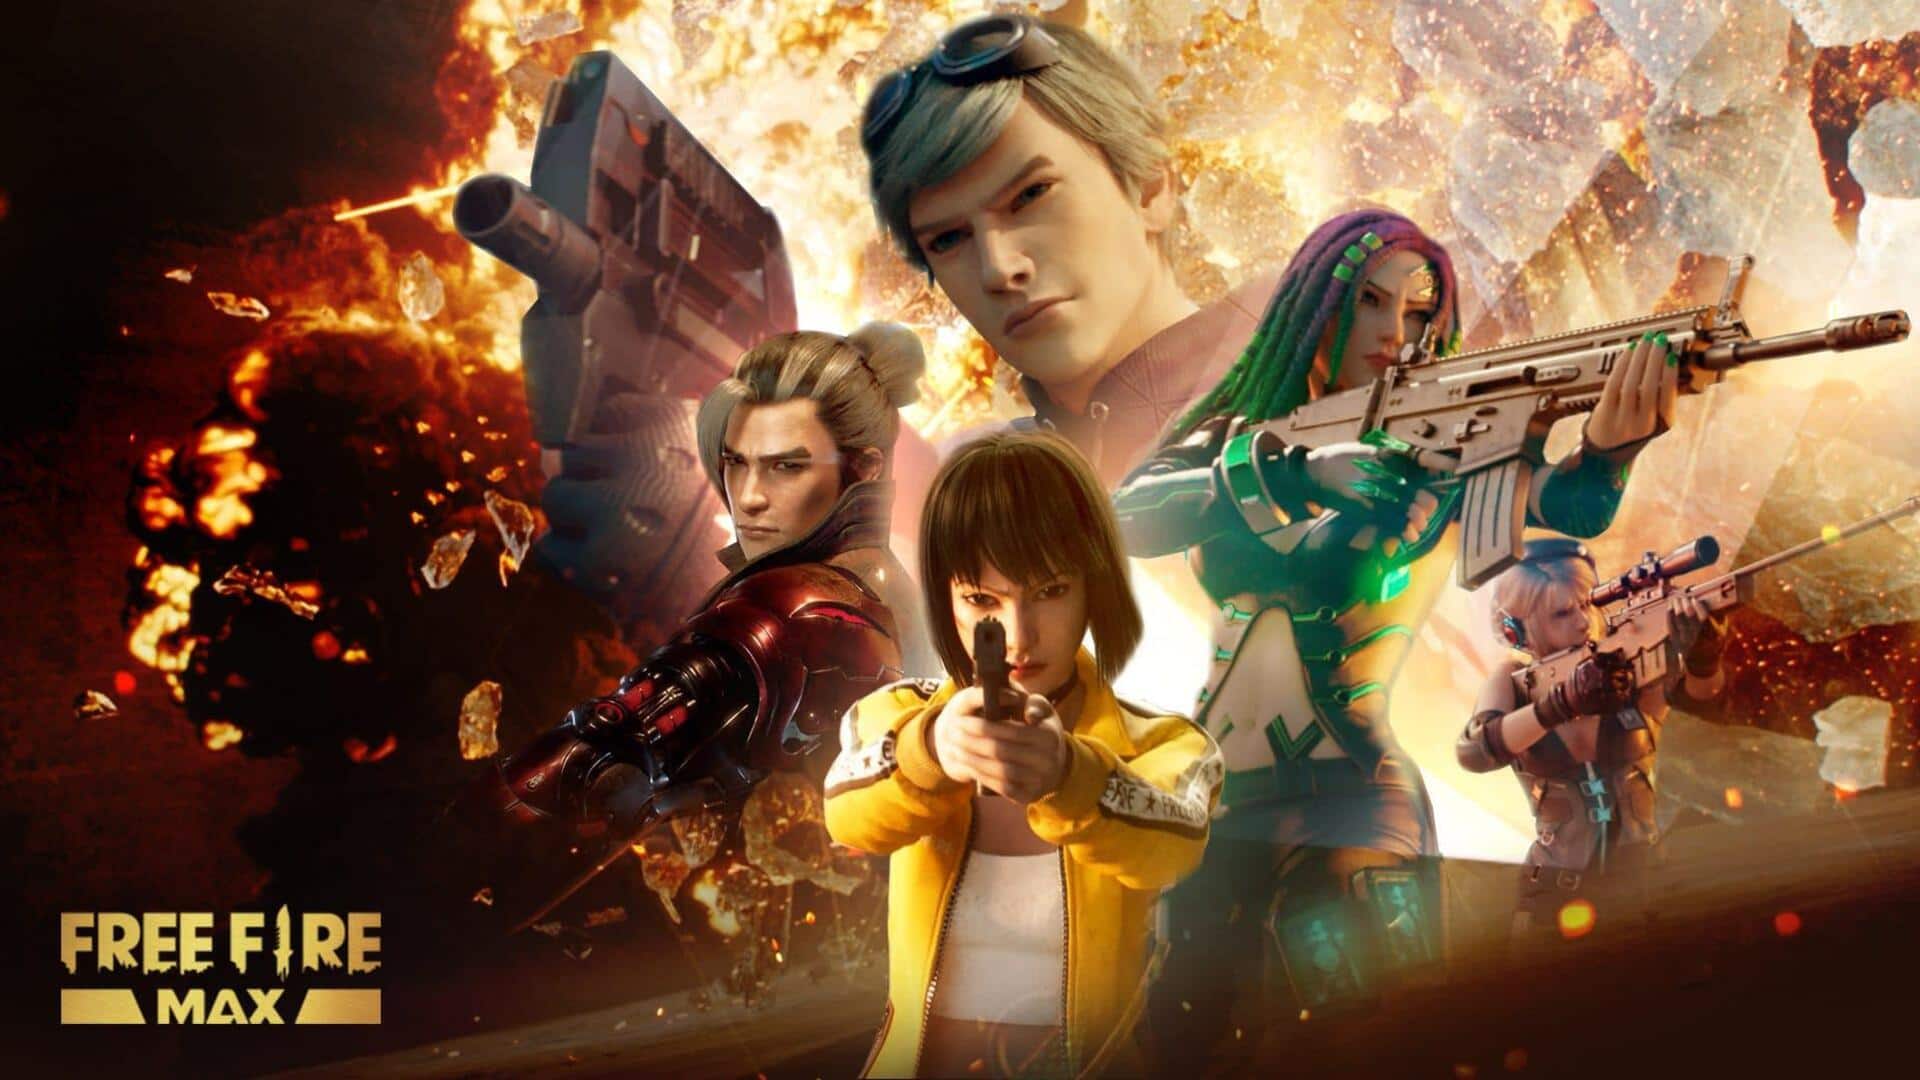 Garena Free Fire MAX codes for October 2: Redeem now